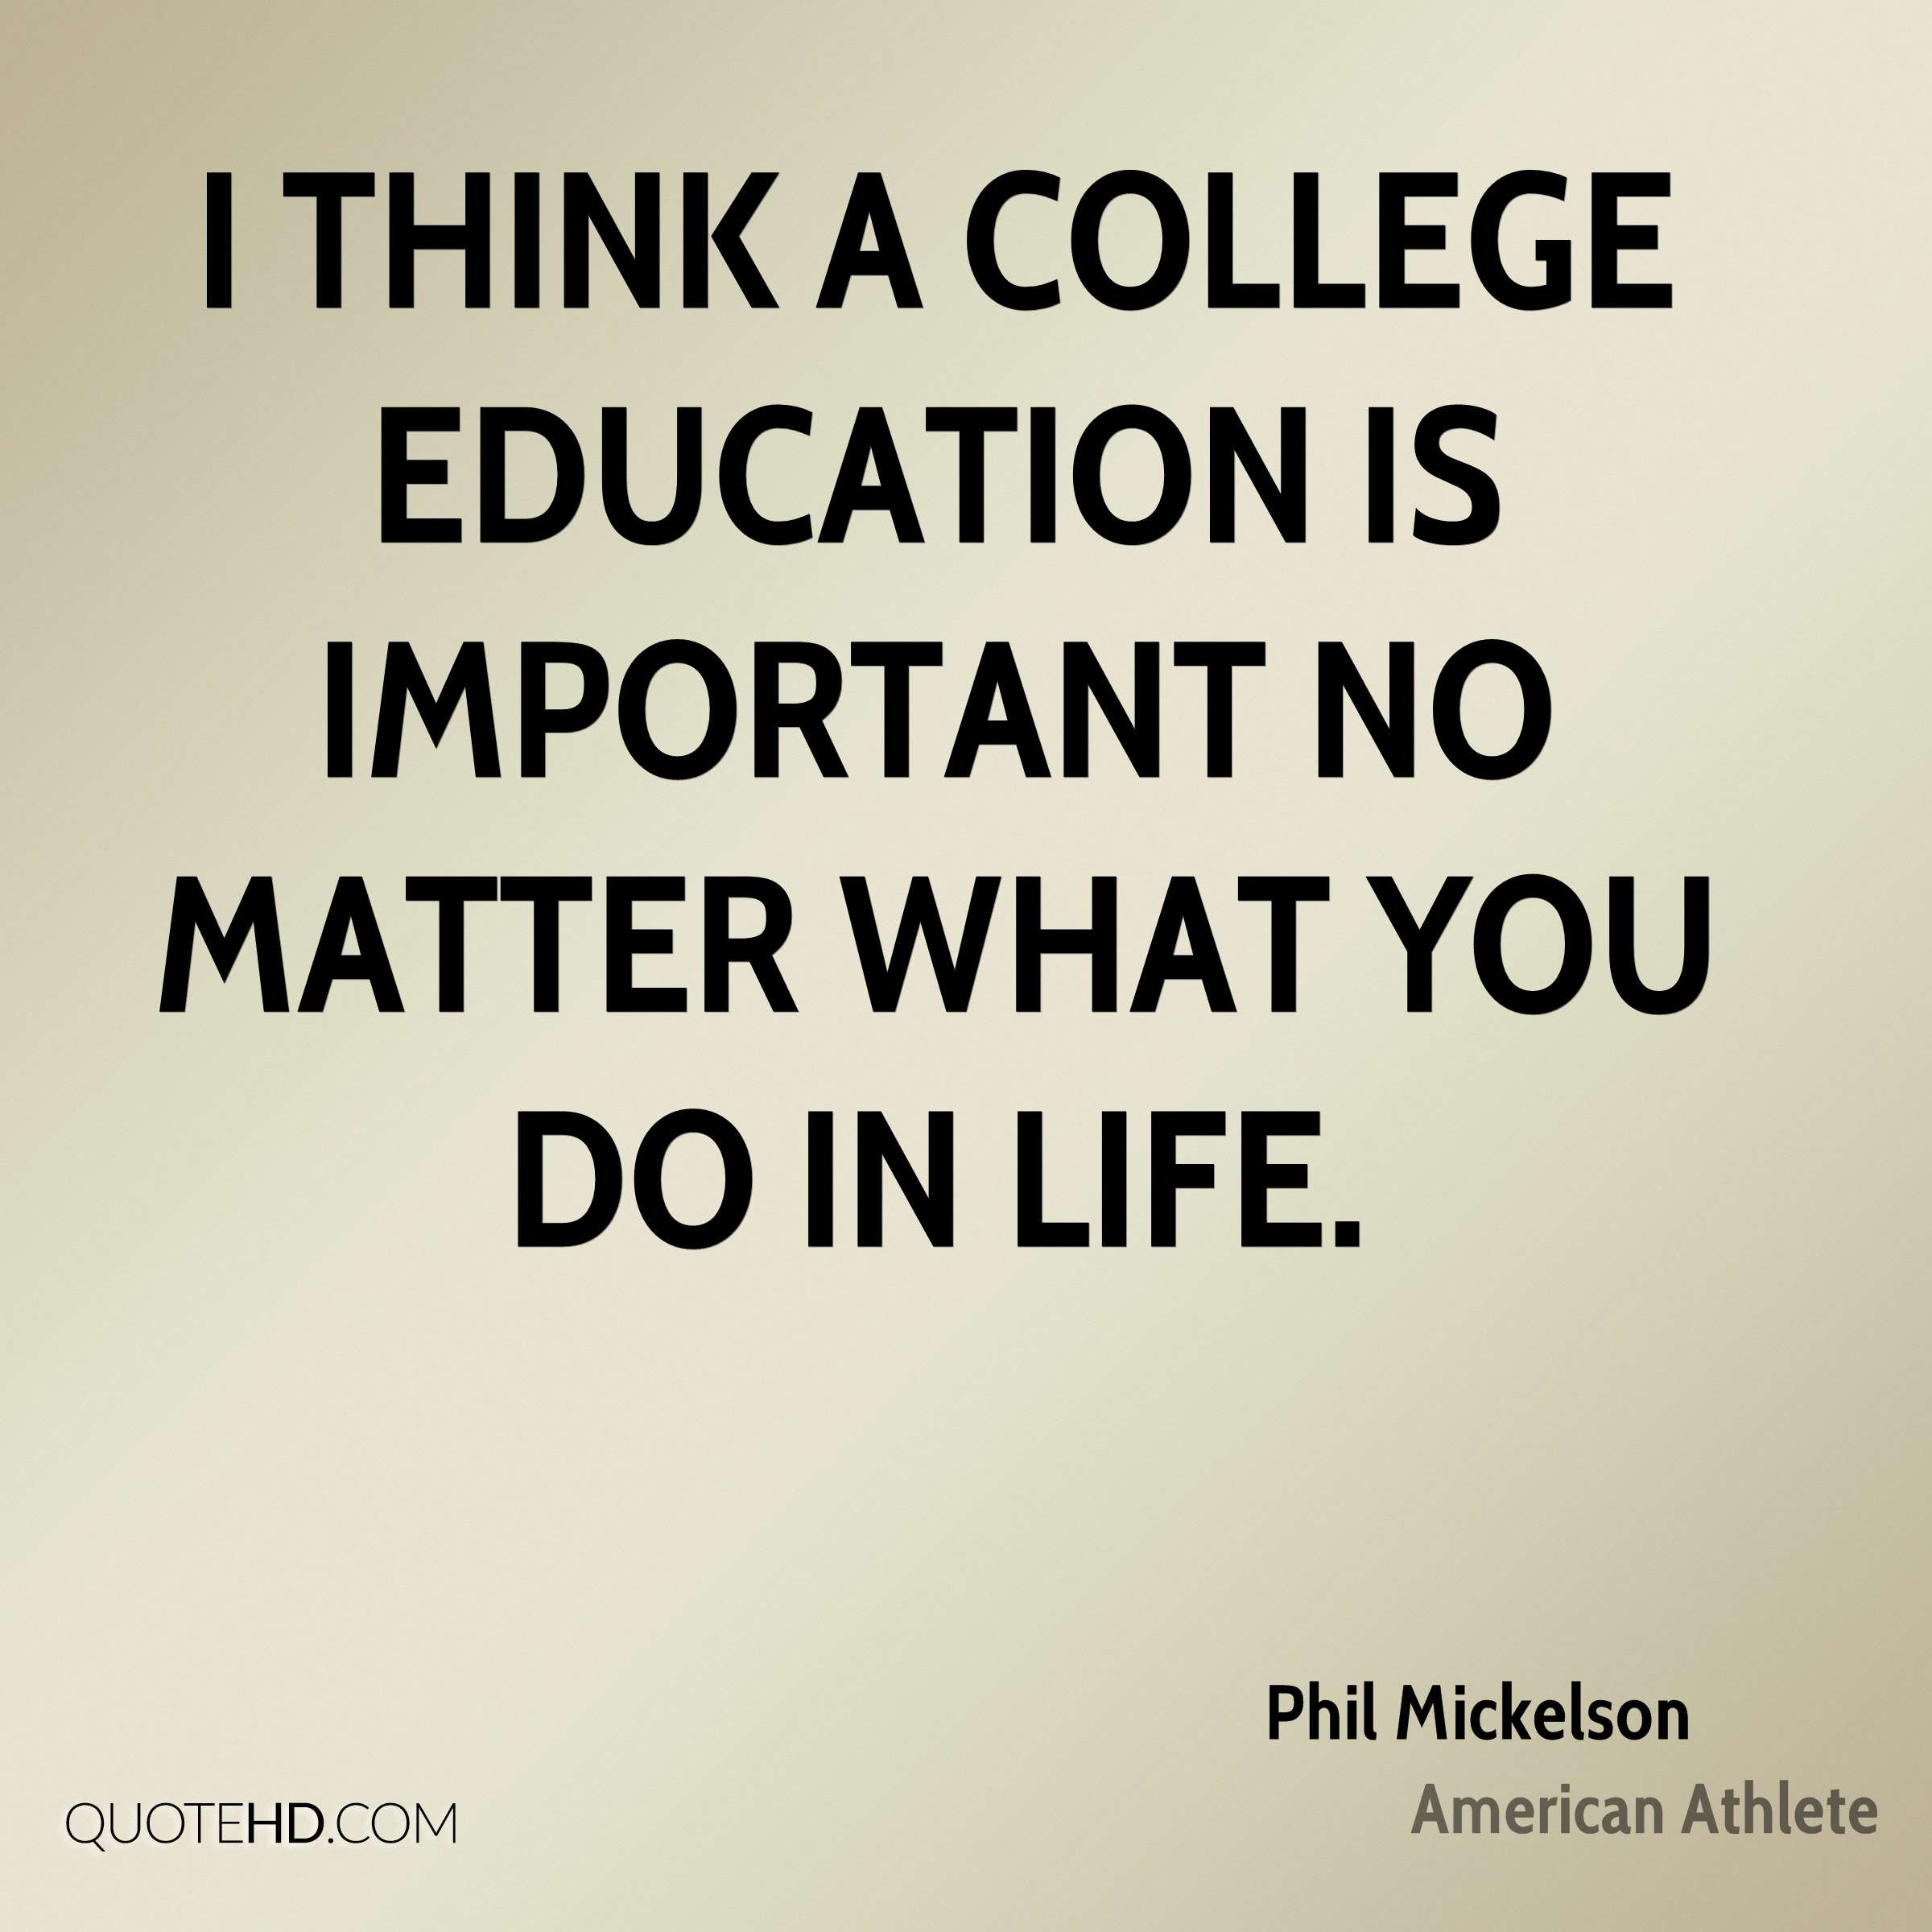 Quotes About College Education
 Why is education important in life